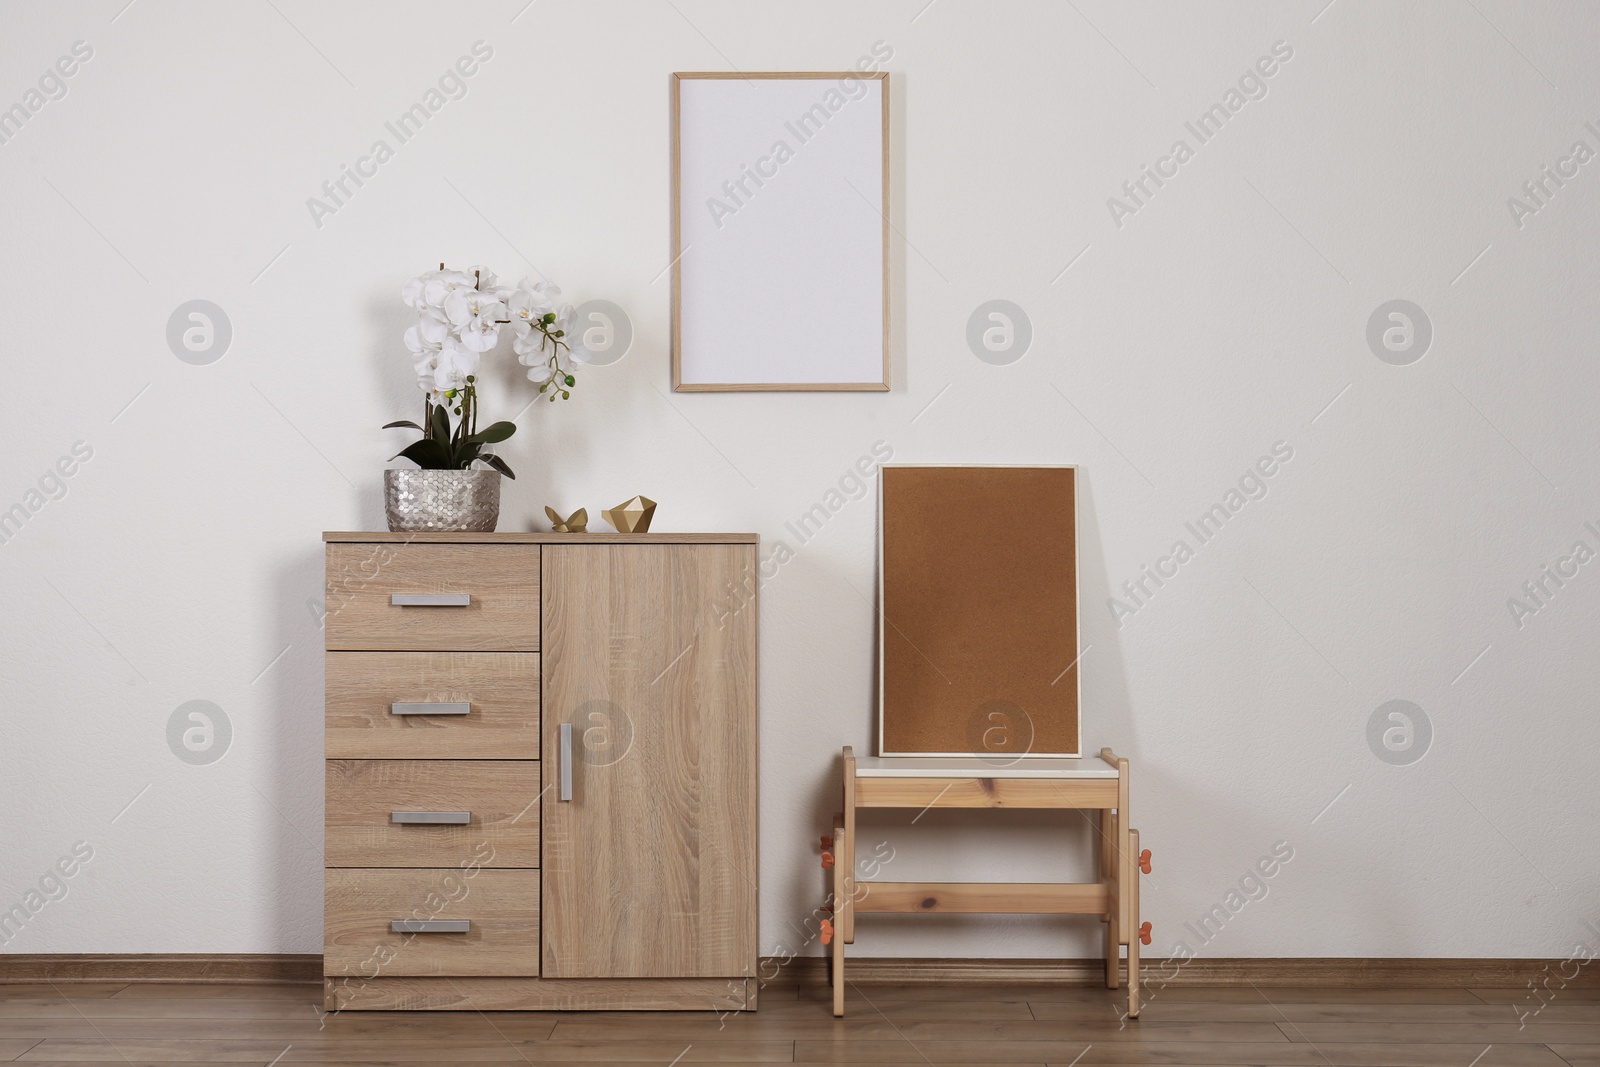 Photo of Chest of drawers, table, orchid and picture frames indoors. Interior design